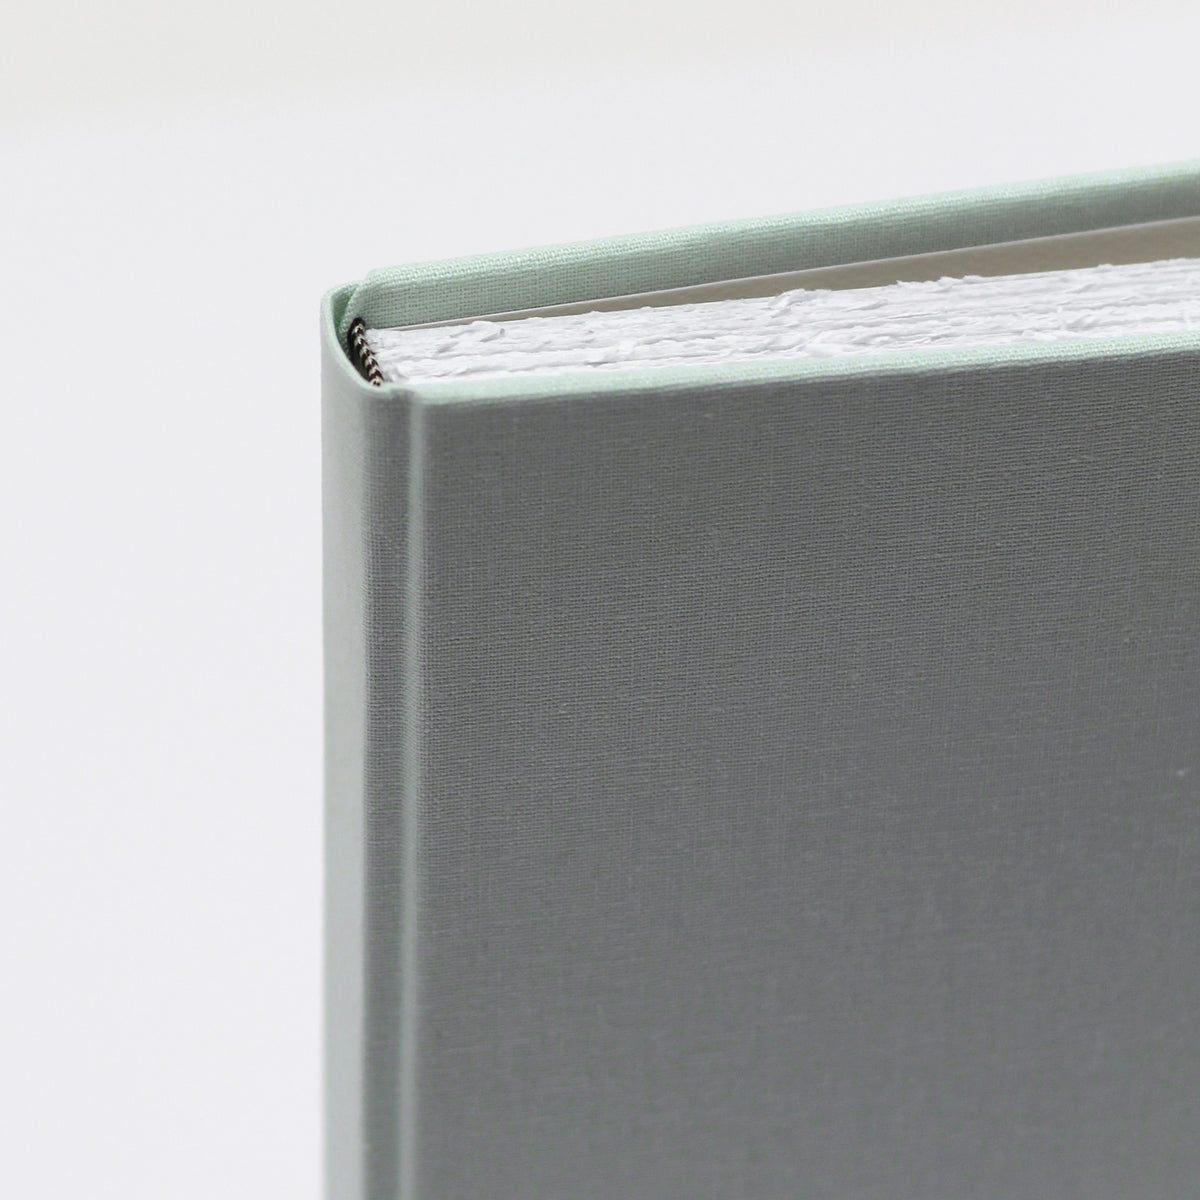 Large 8x10 Blank Page Journal | Cover: Pastel Blue | Available Personalized